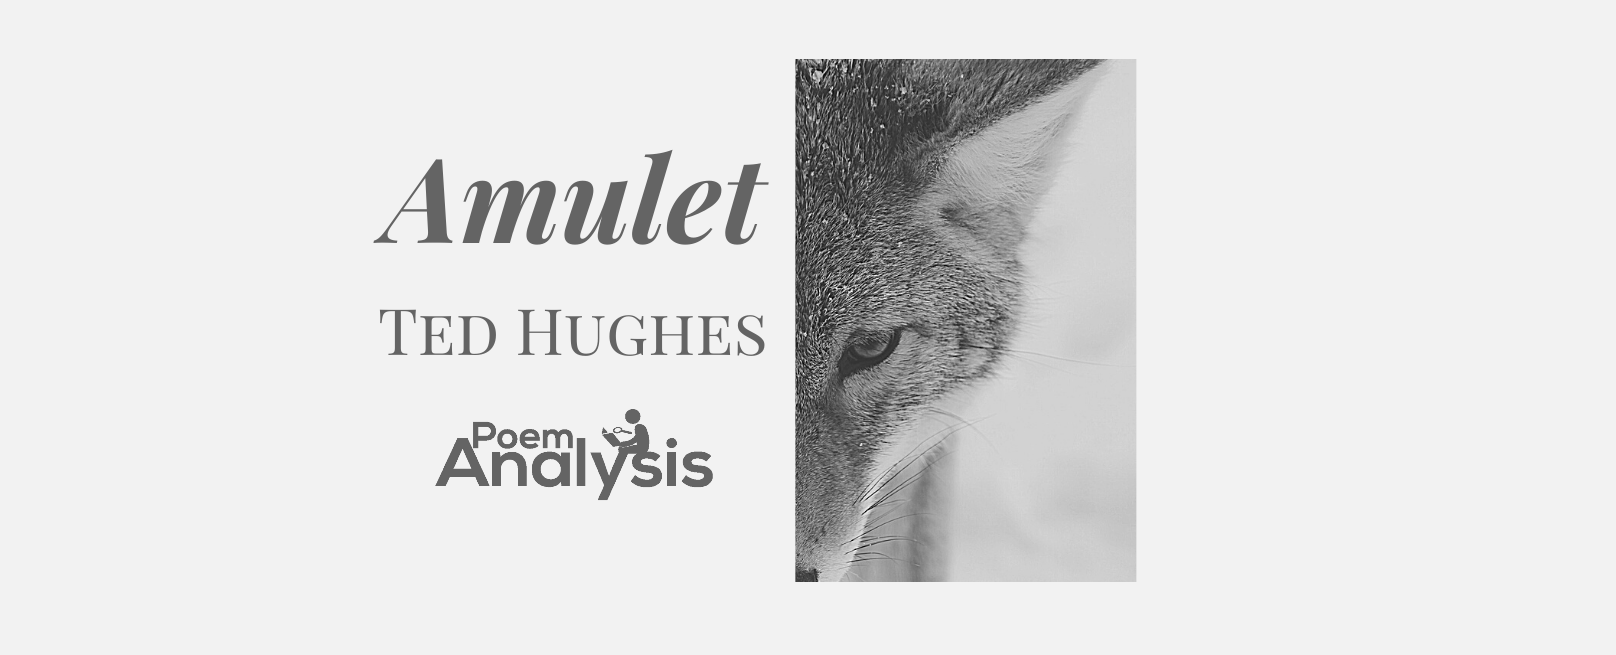 Amulet by Ted Hughes - Poem Analysis